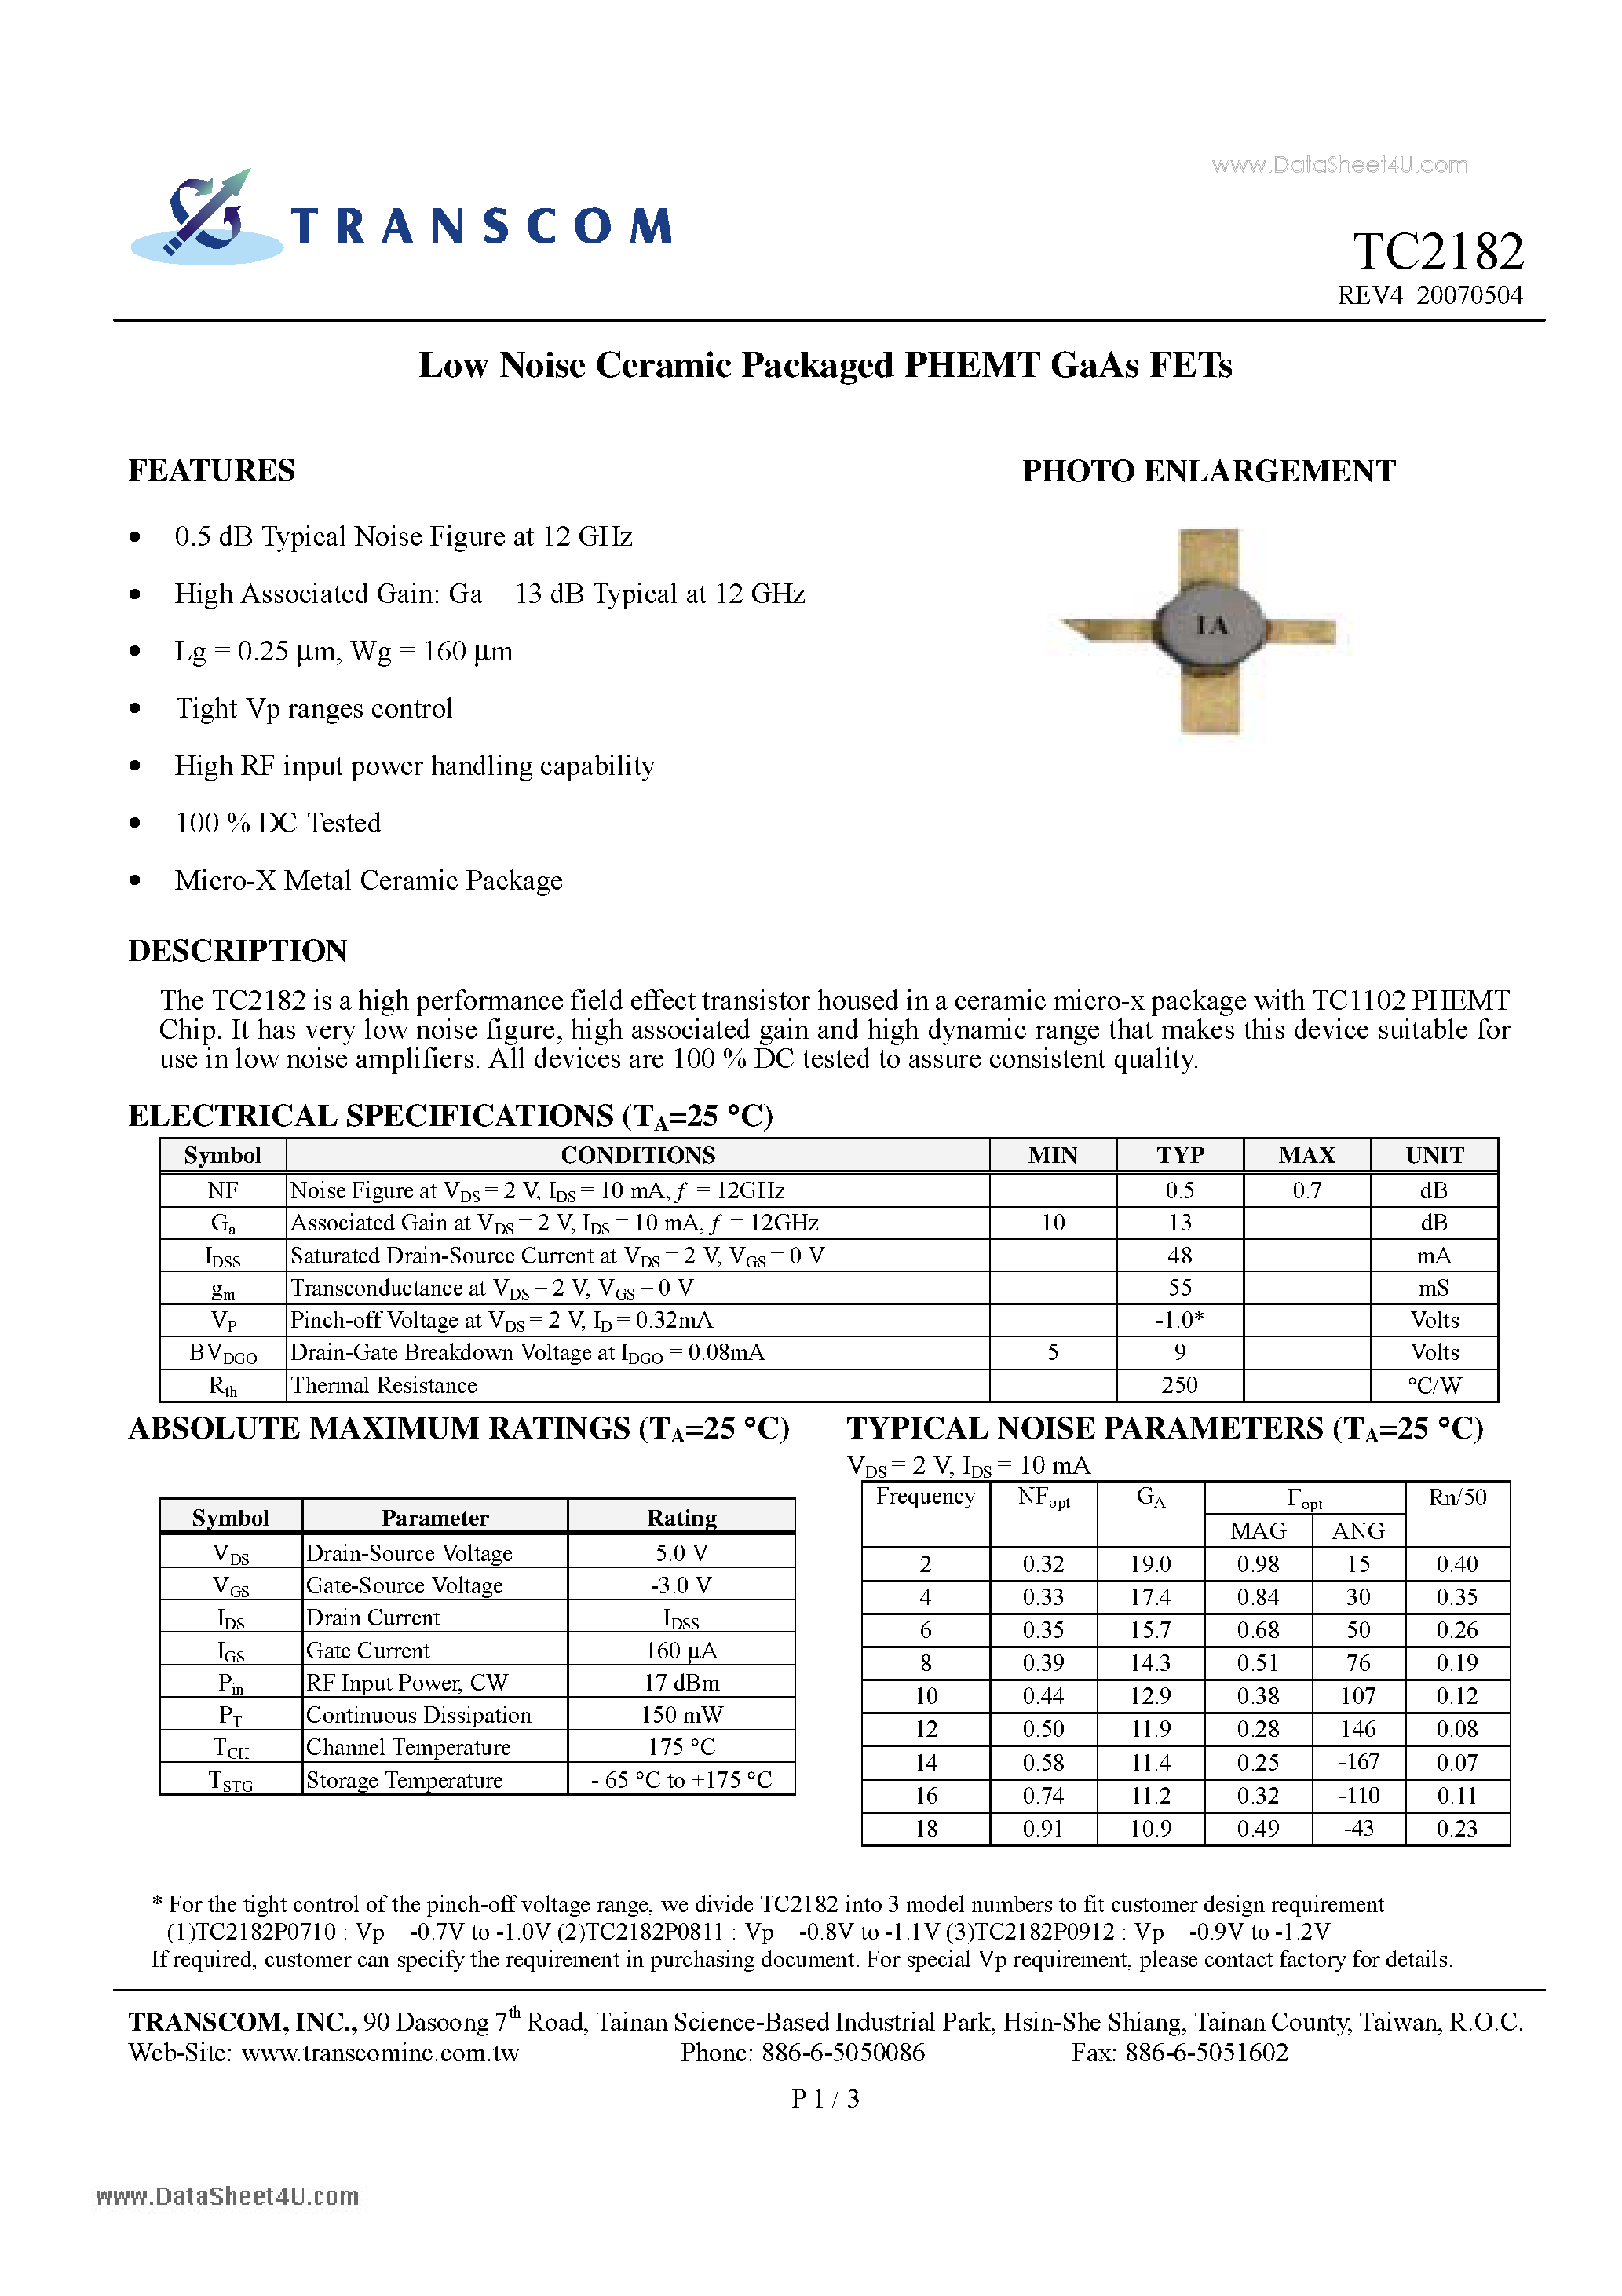 Datasheet TC2182 - Low Noise Ceramic Packaged PHEMT GaAs FETs page 1